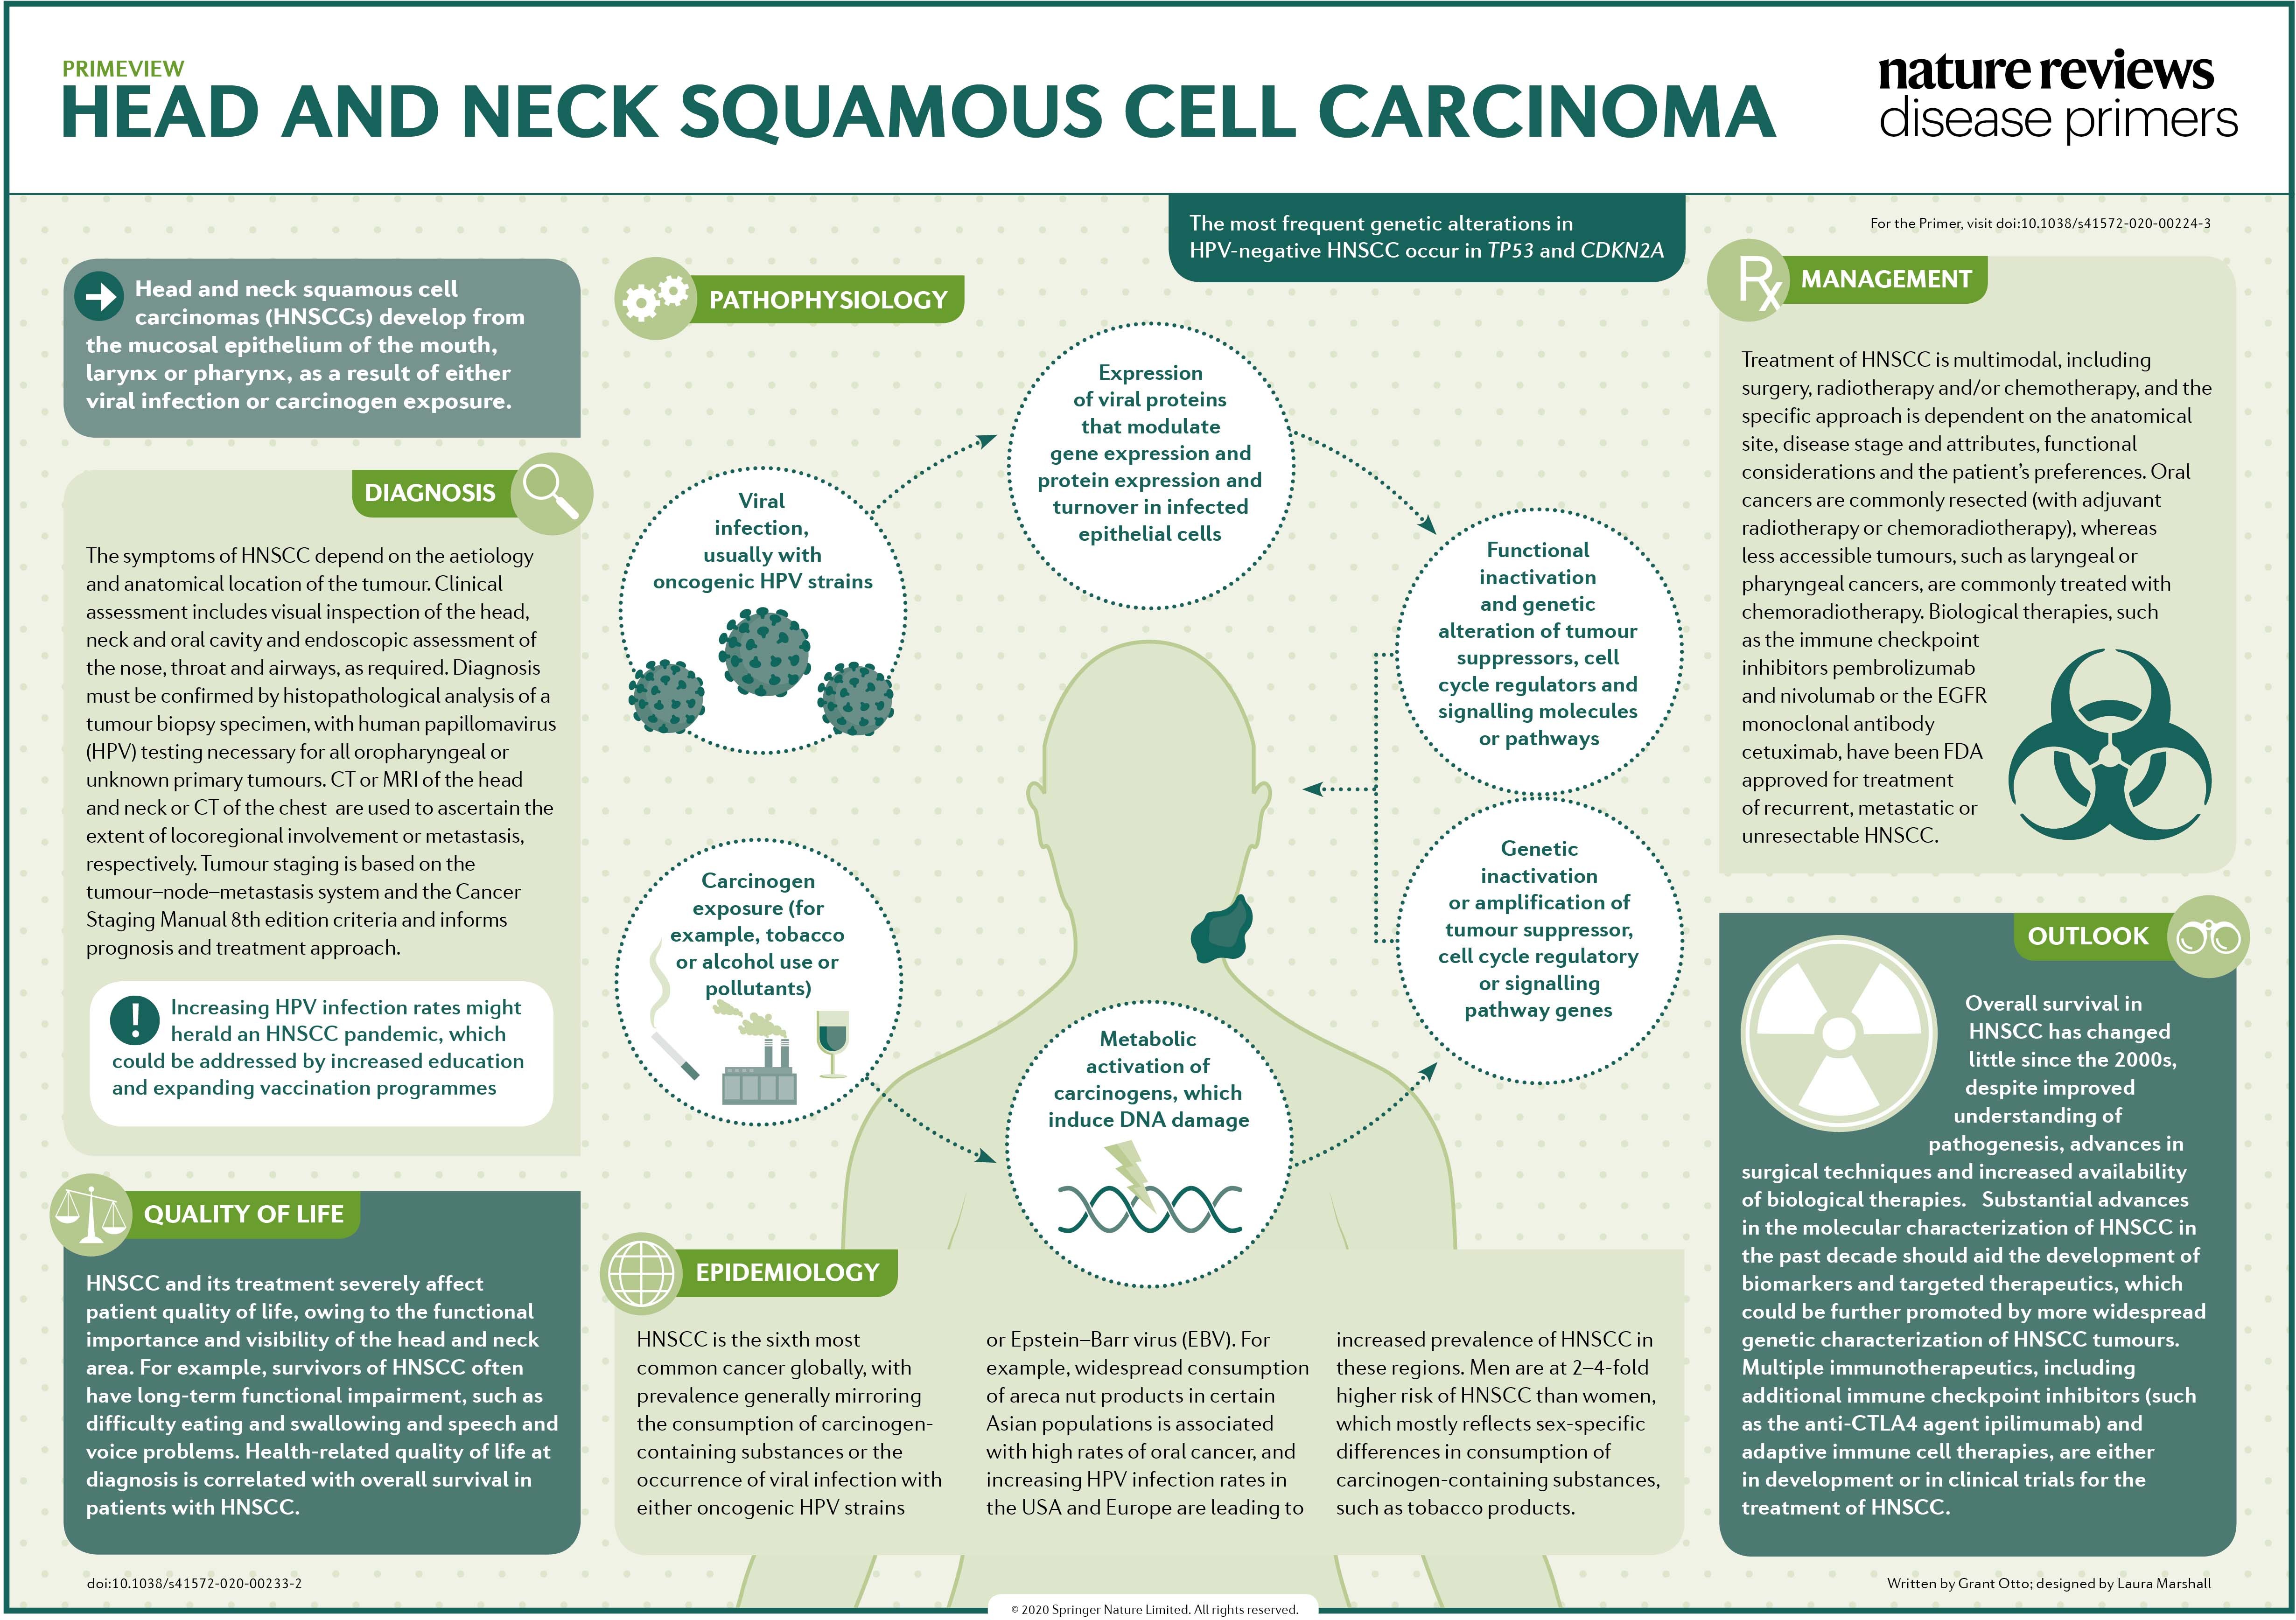 and squamous cell carcinoma | Nature Reviews Disease